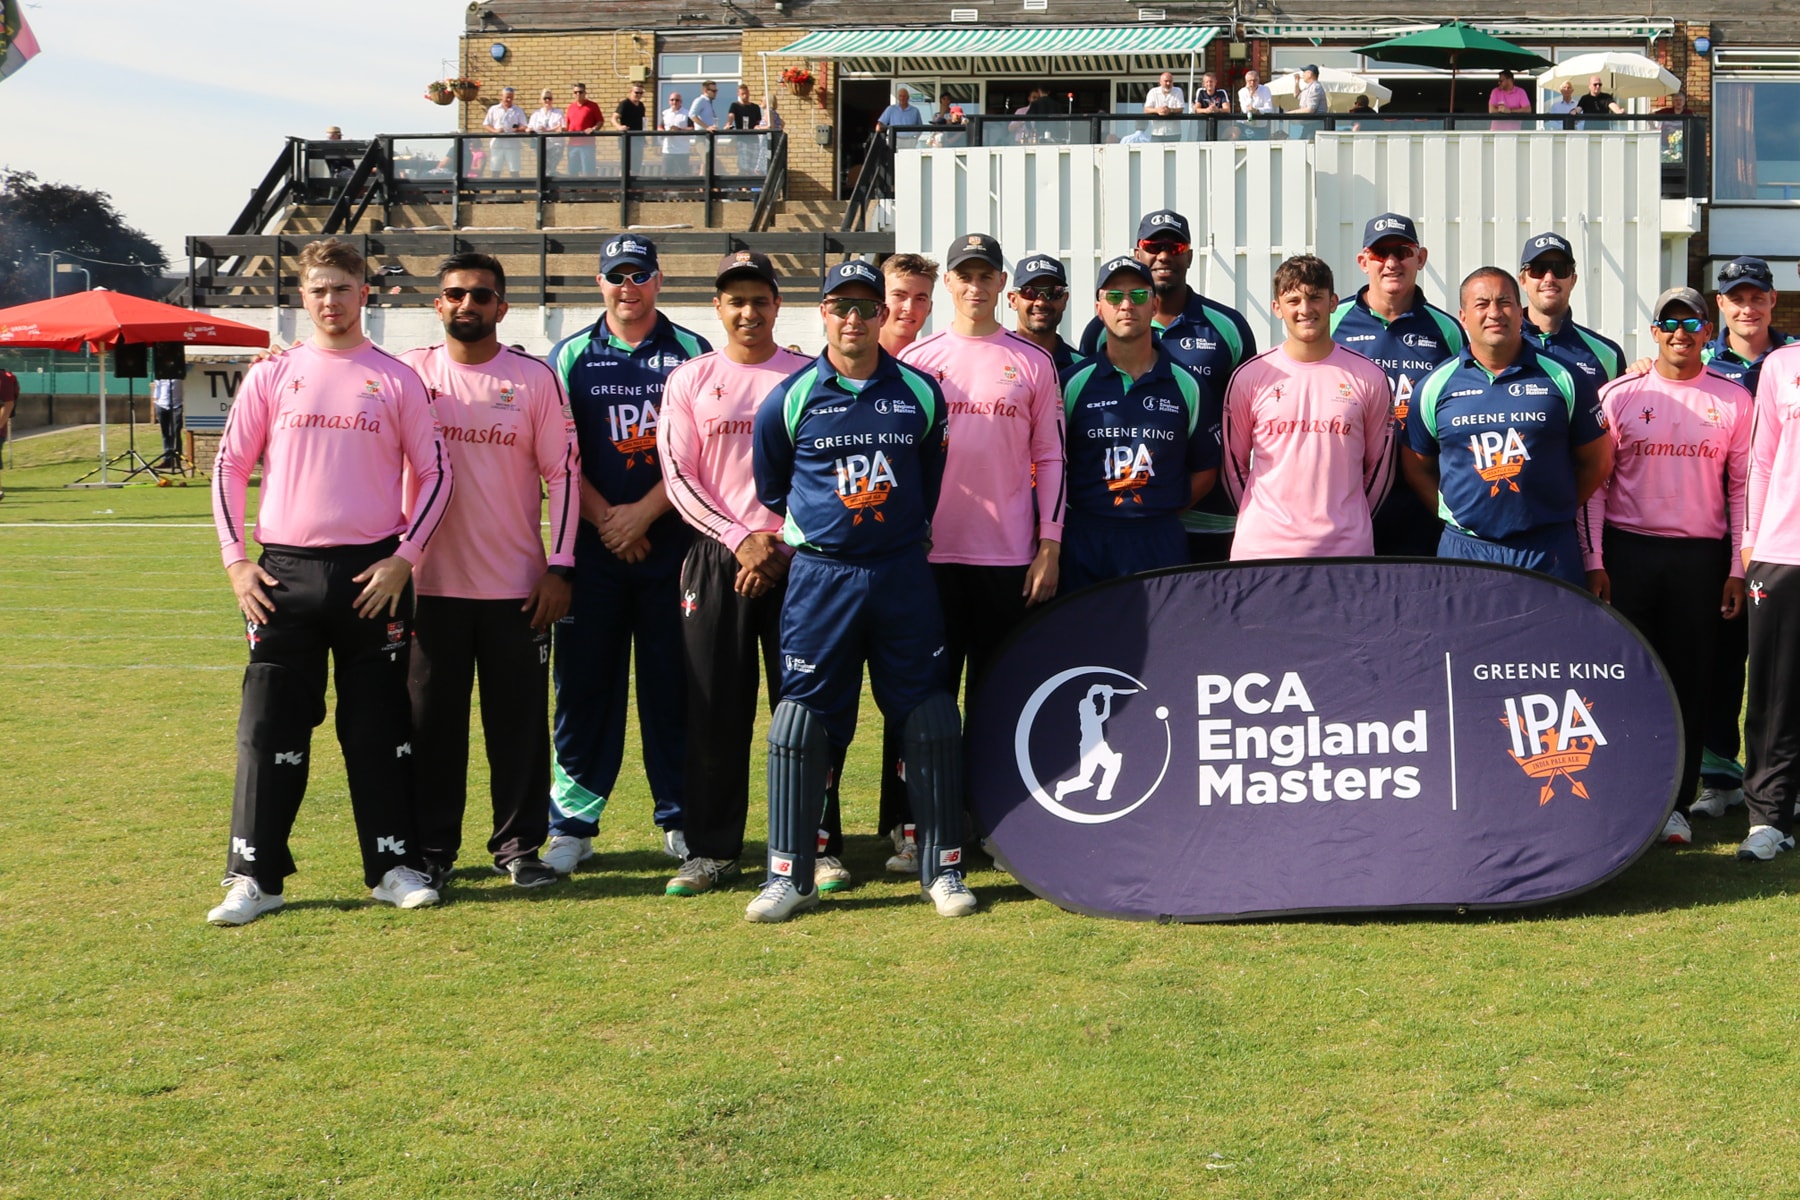 Bromley CC reflects on continued Masters success